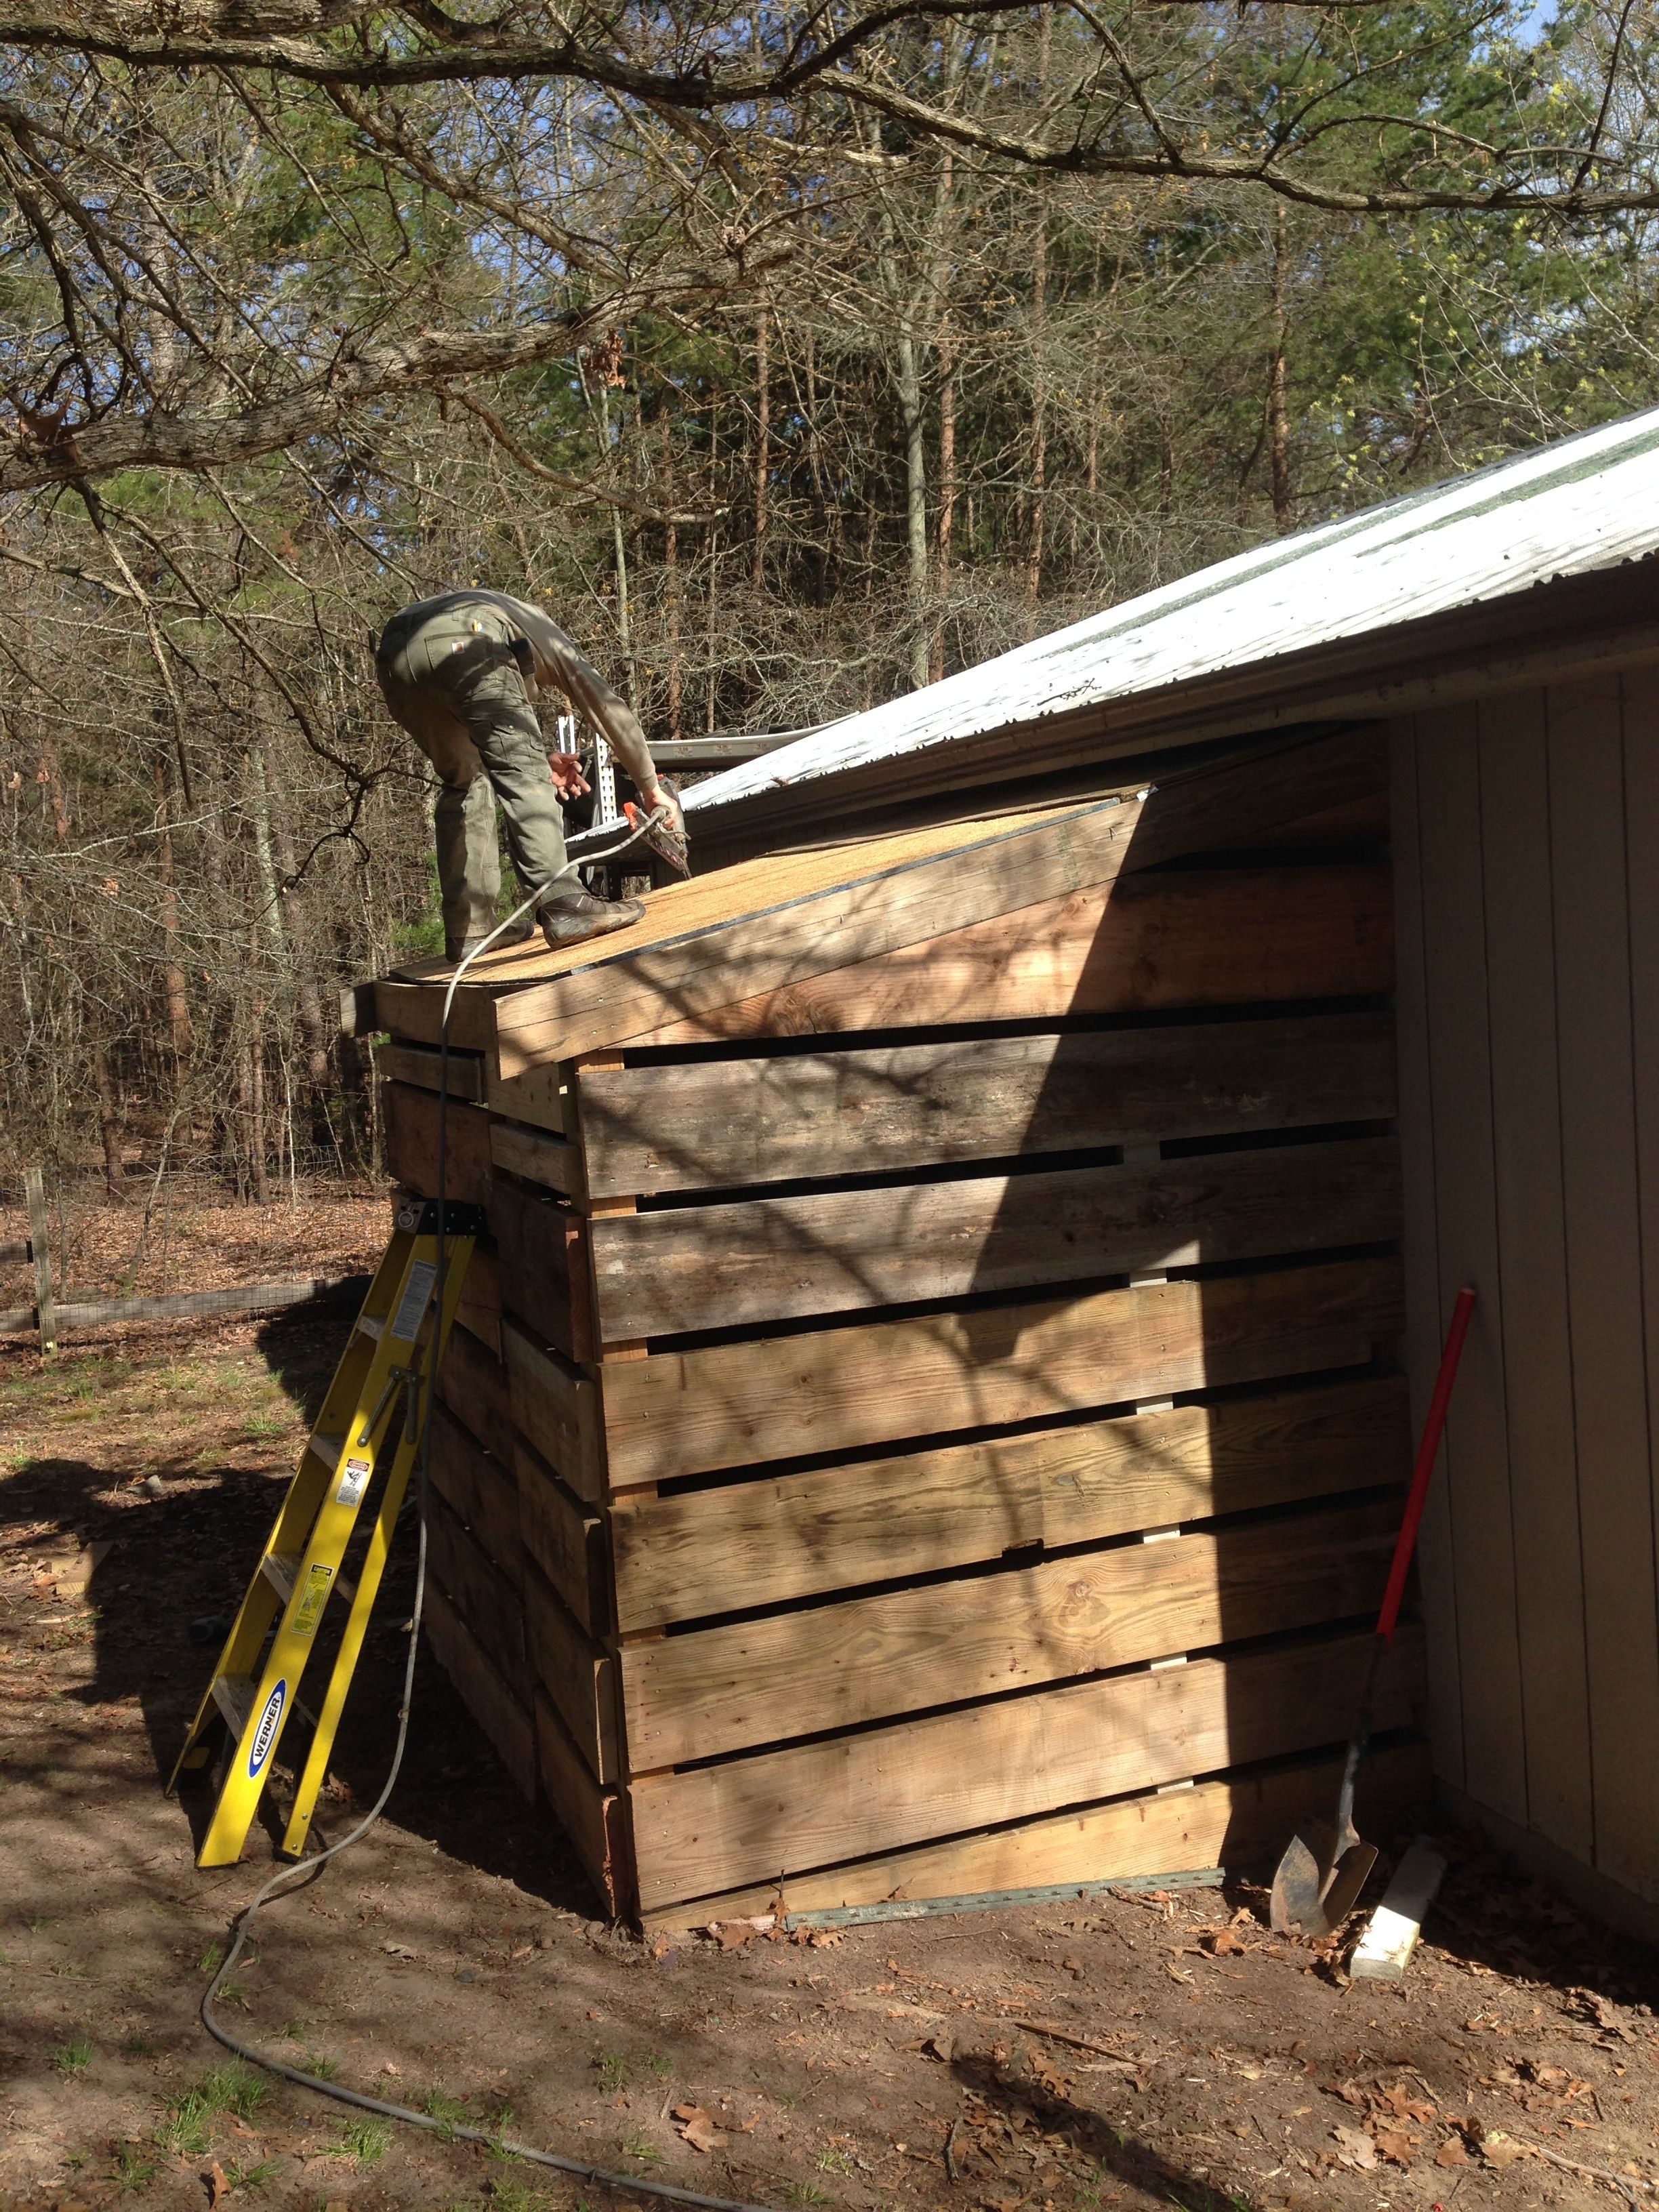 Dan putting the shingles on the new coop!